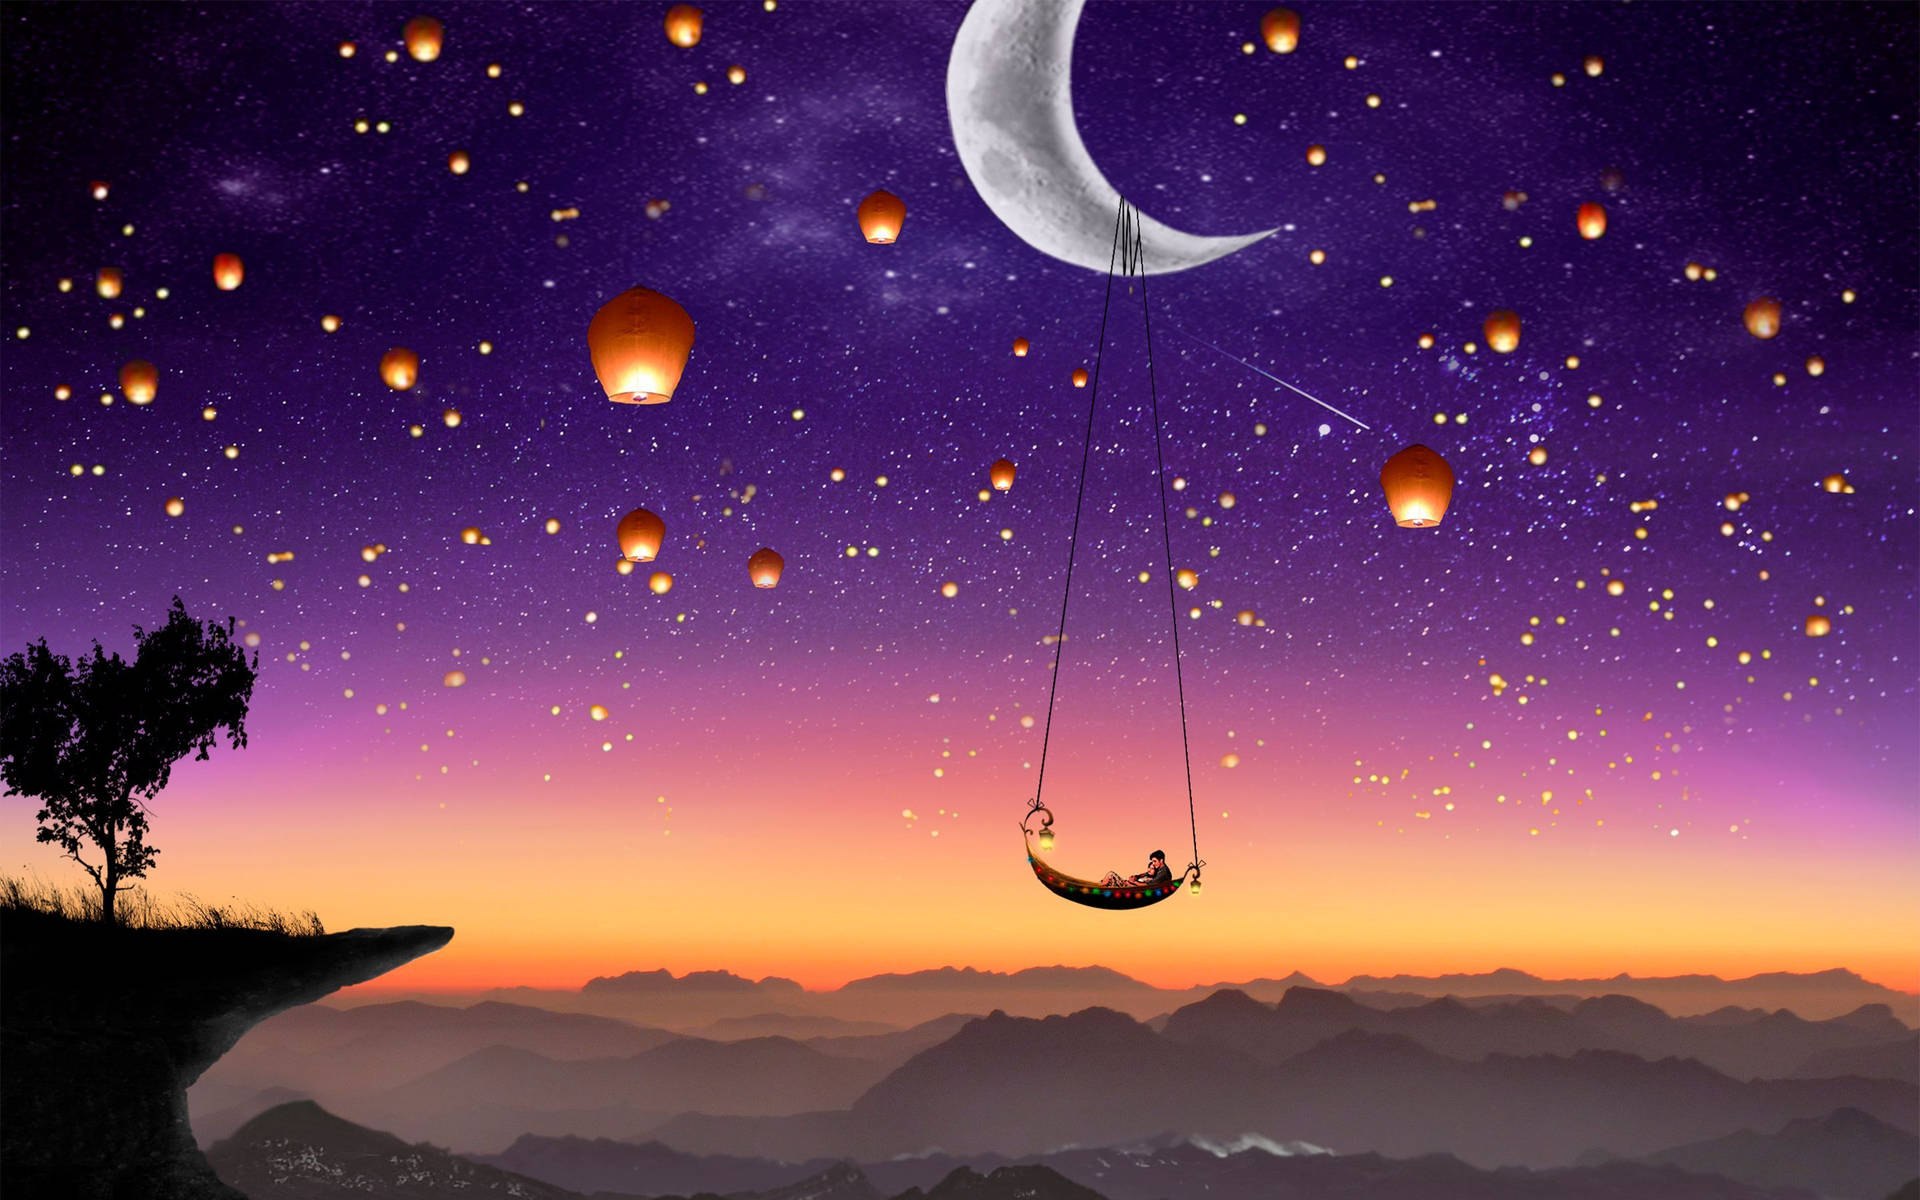 A forest of lanterns during a crescent moon night Wallpaper